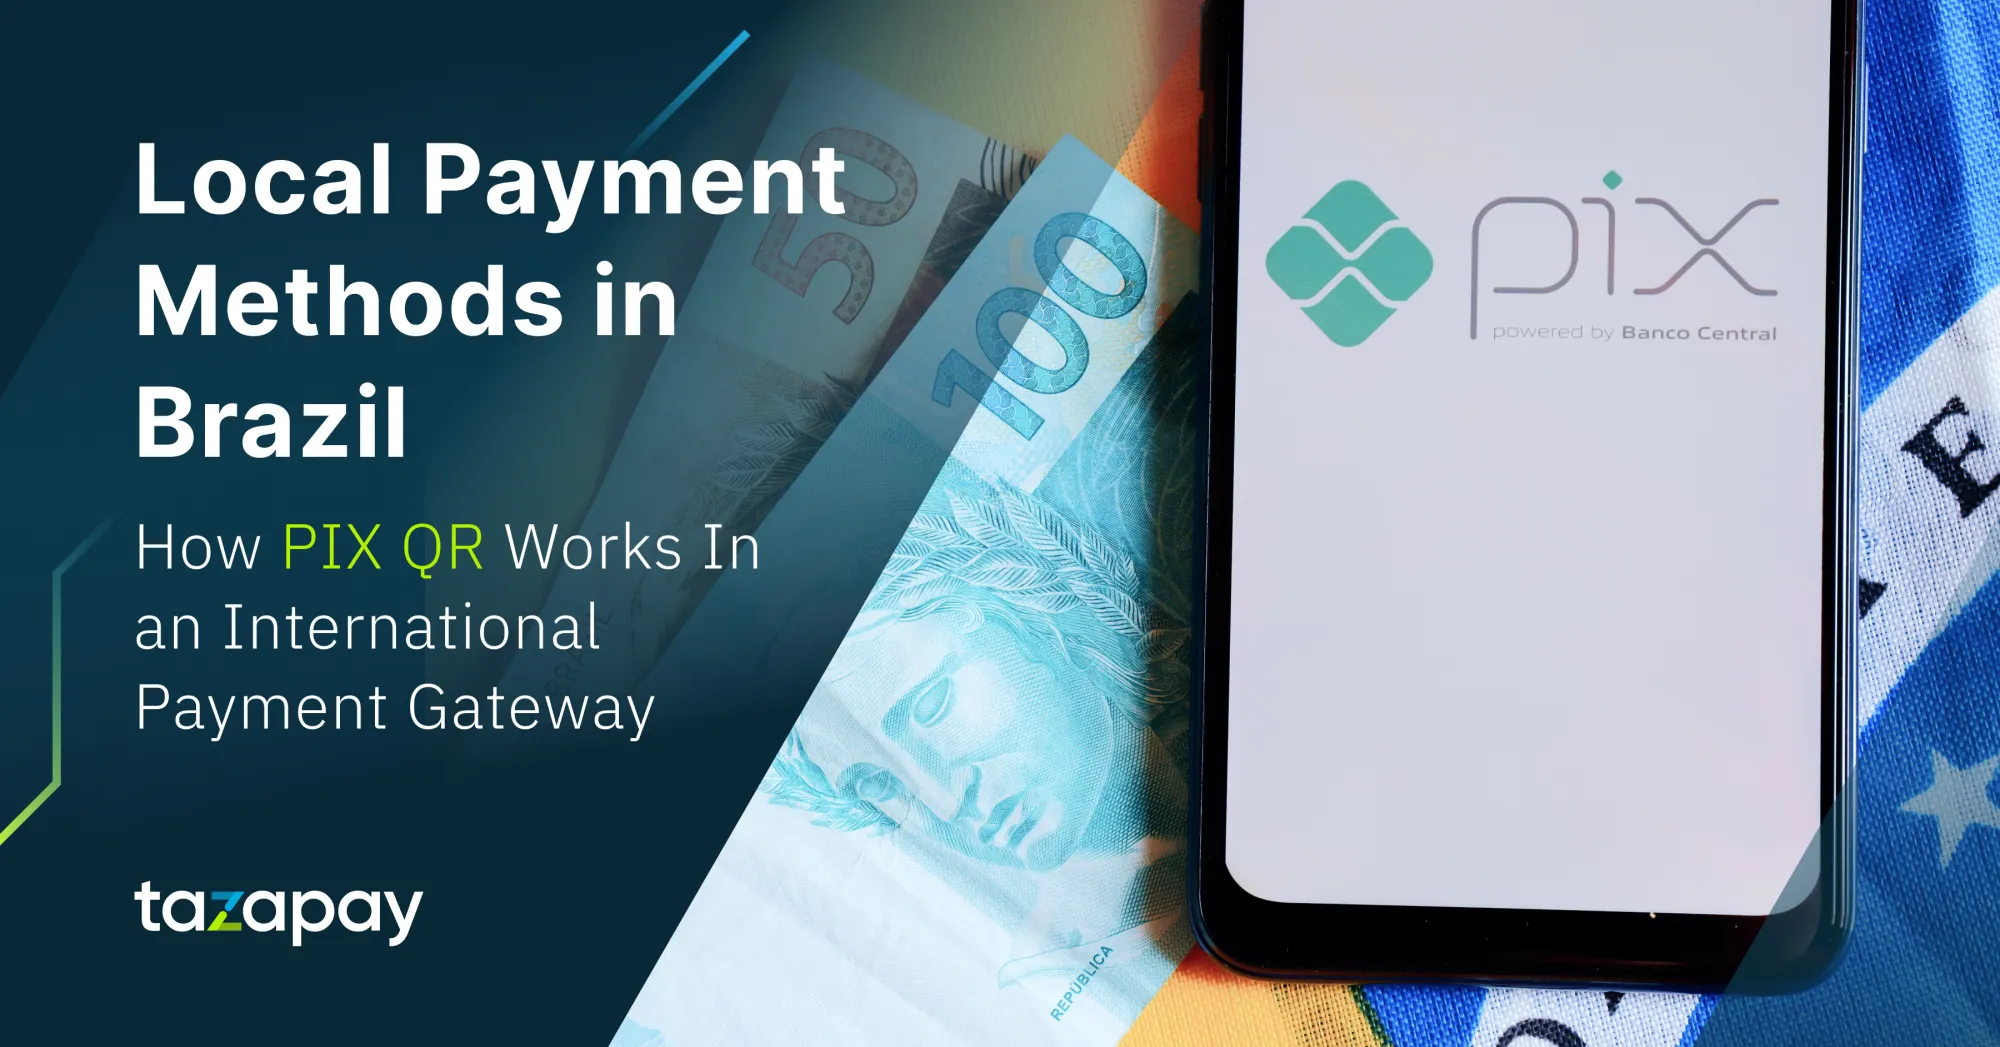 Local Payment Methods in Brazil: How PIX QR Works in an International Payment Gateway